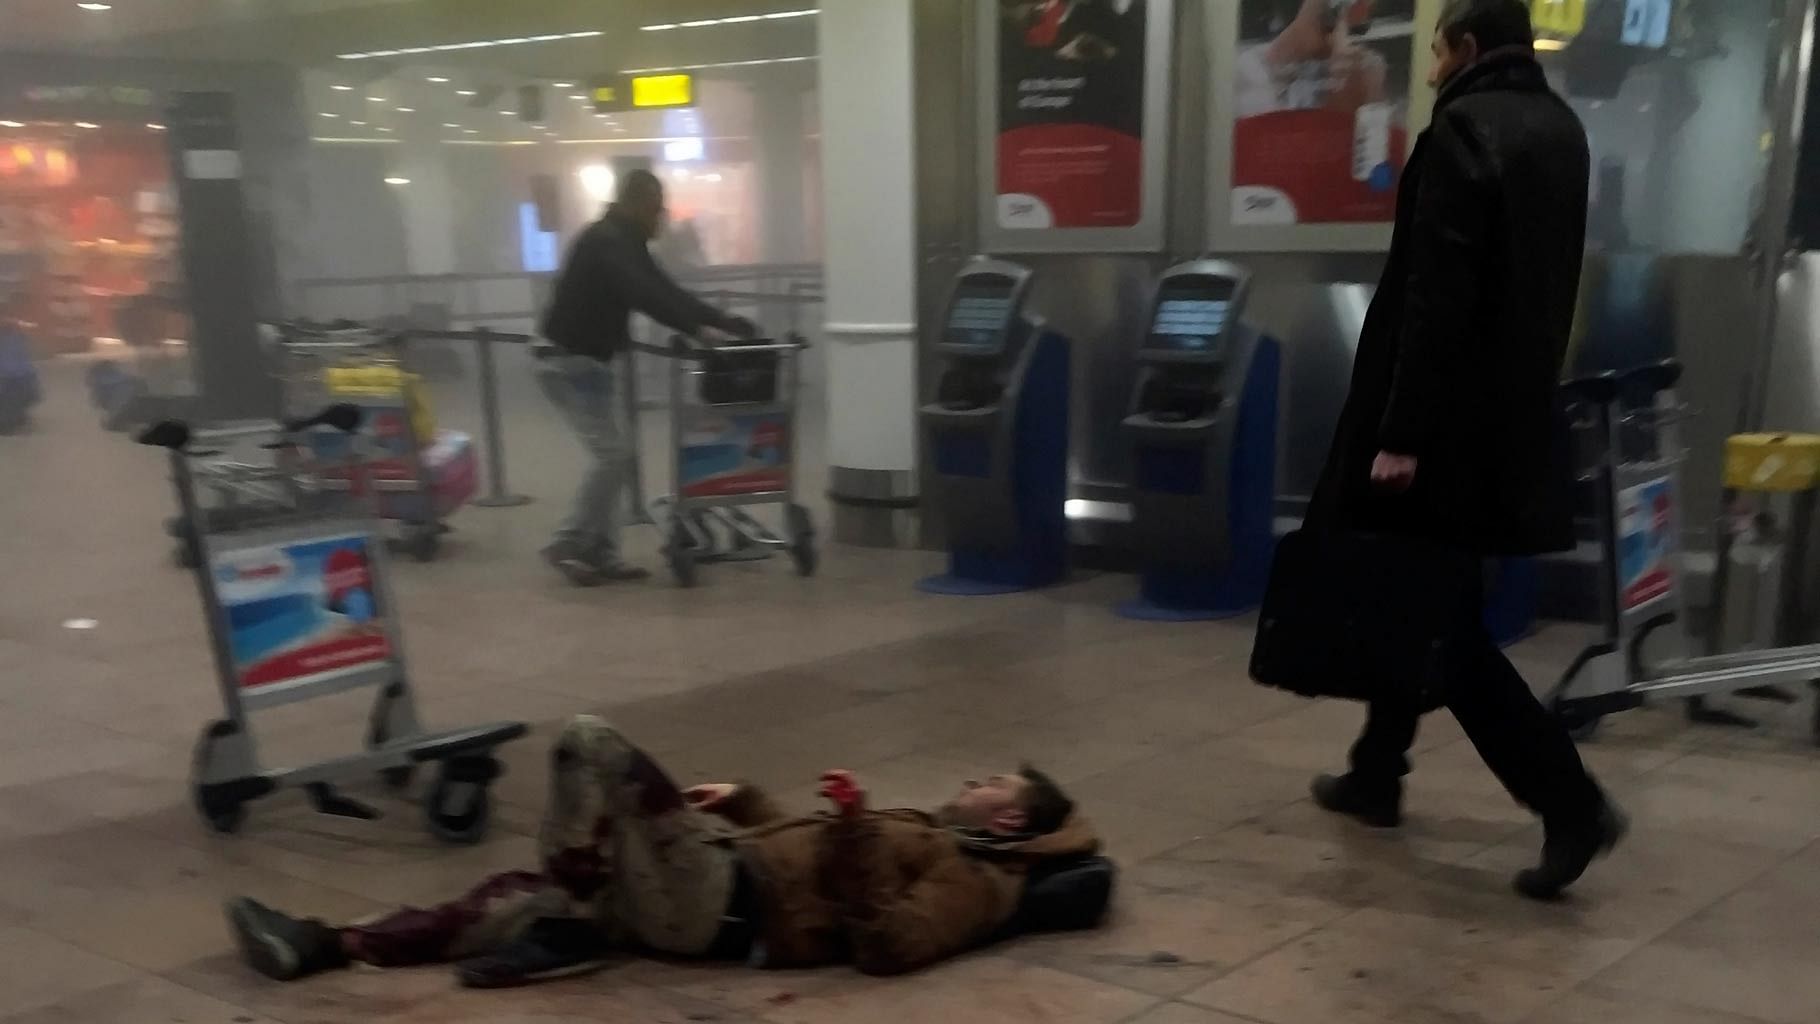 A man lies wounded on the floor of the Brussels Airport, Belgium, after explosions ripped through the departure hall Tuesday, March 22, 2016. (Photo: AP)